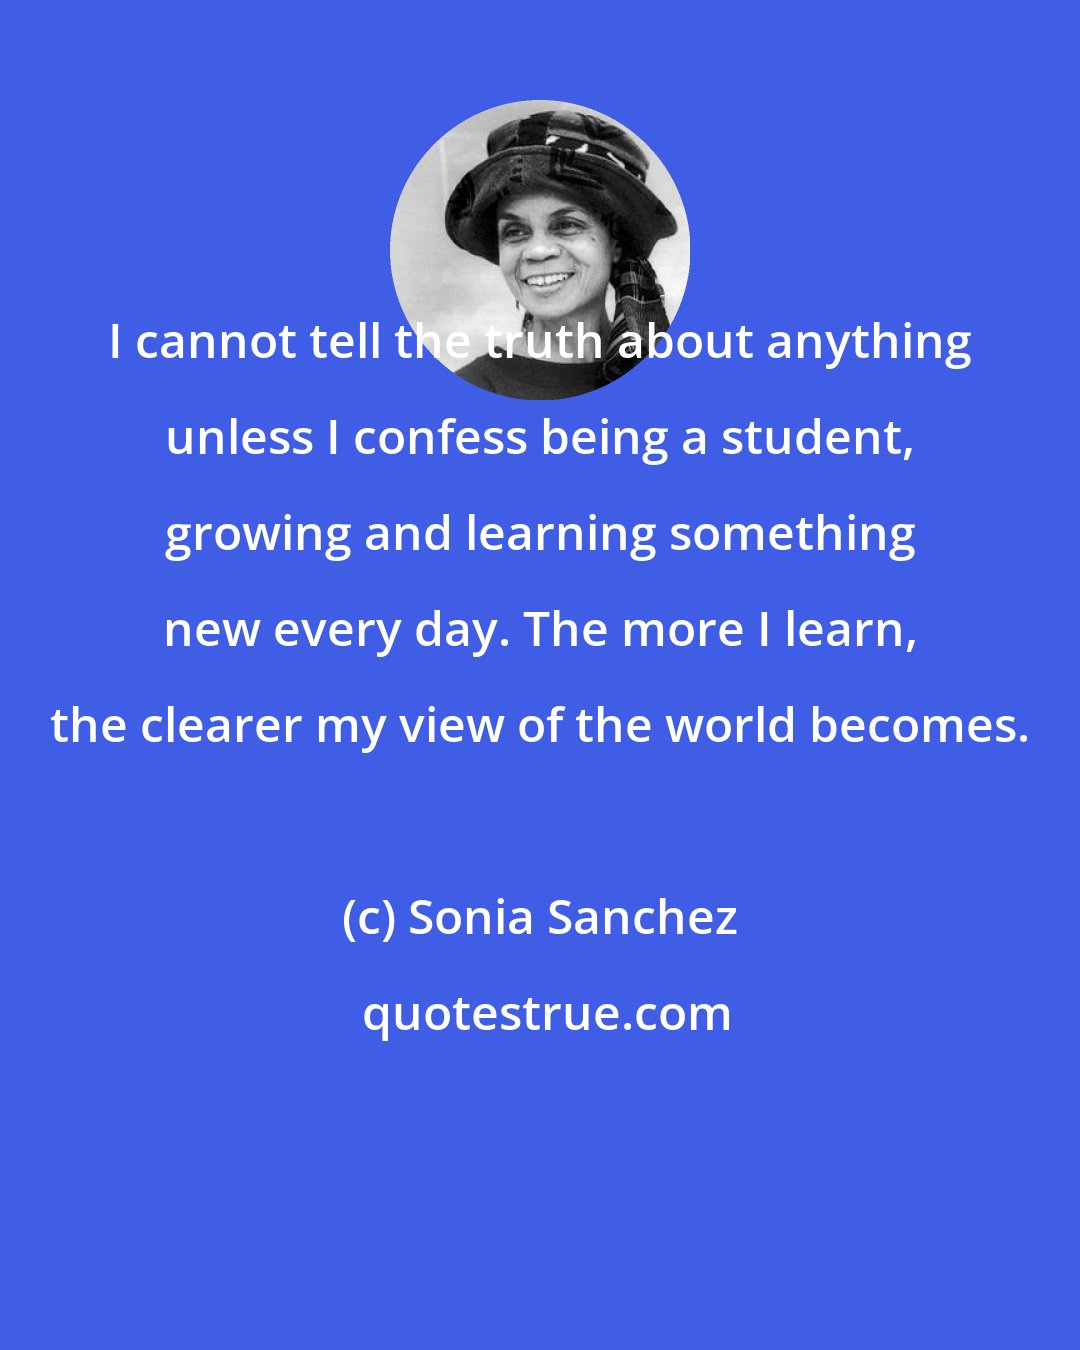 Sonia Sanchez: I cannot tell the truth about anything unless I confess being a student, growing and learning something new every day. The more I learn, the clearer my view of the world becomes.